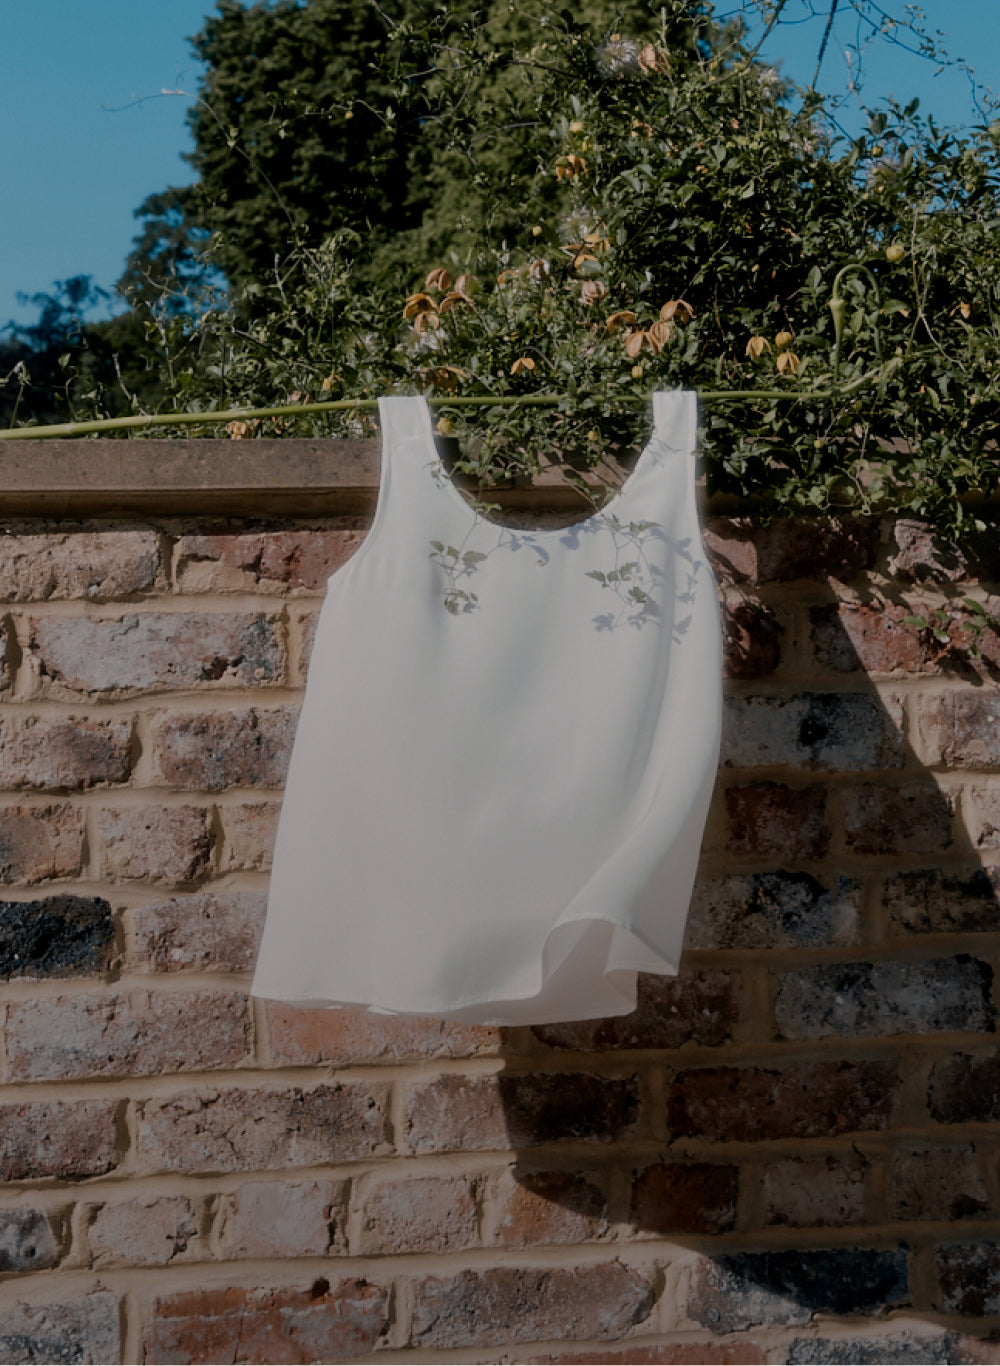 Dress hanging on a brick wall with vegetation in the background.